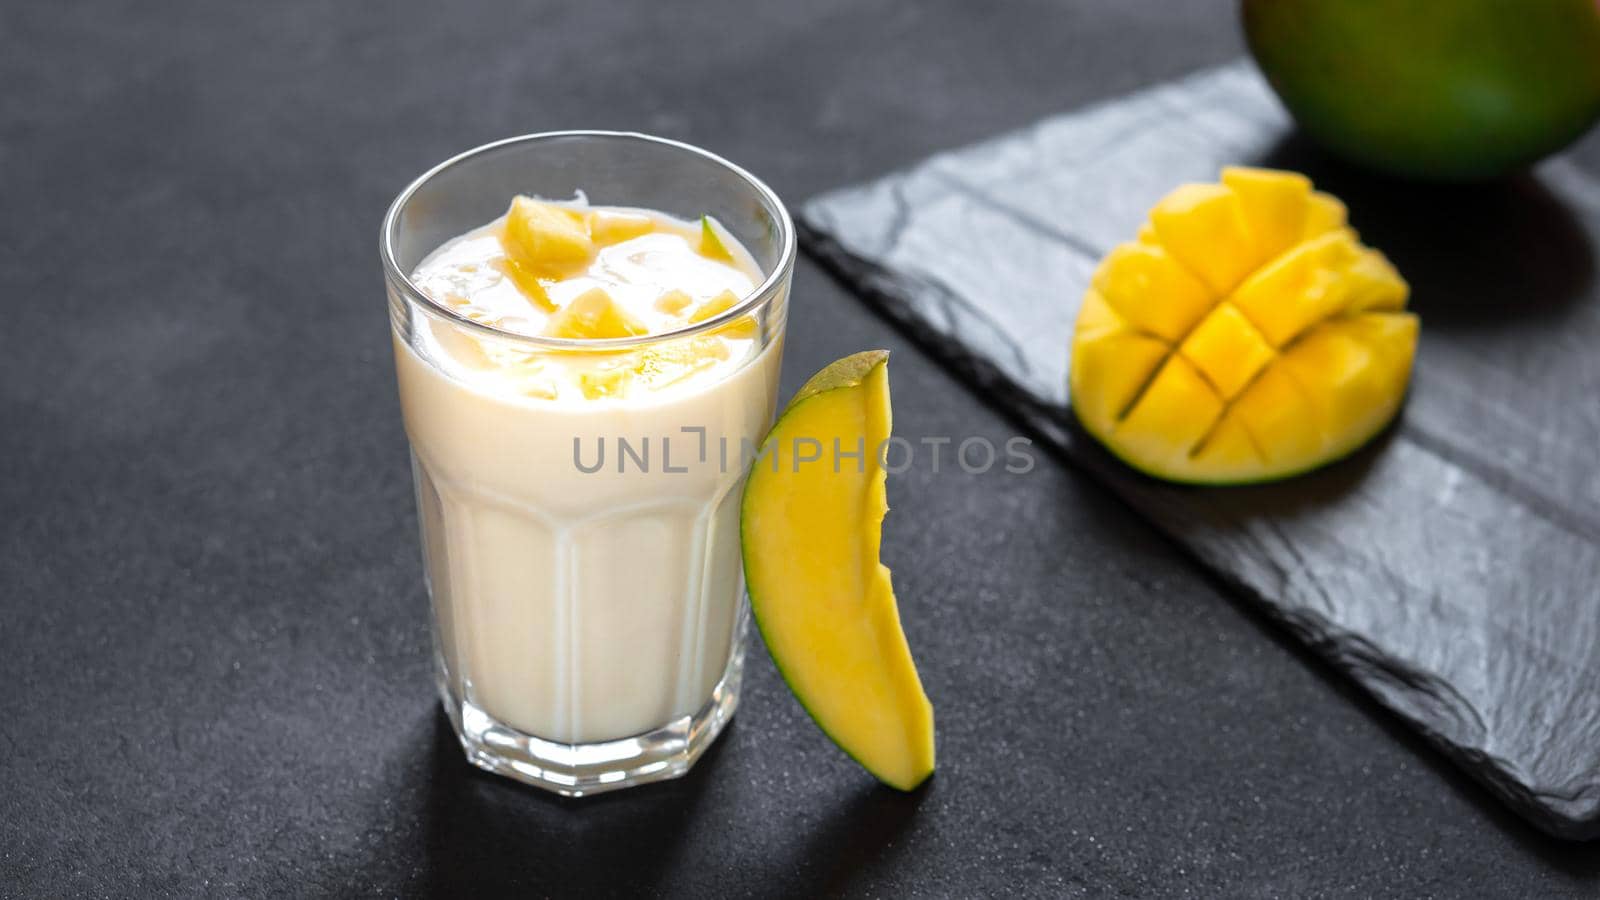 Lassi is a popular traditional dahi, yogurt based cold drink in India. Lassi consists of yogurt, water, spices and sometimes fruit and ice. Milk shake on black background with mango pieces